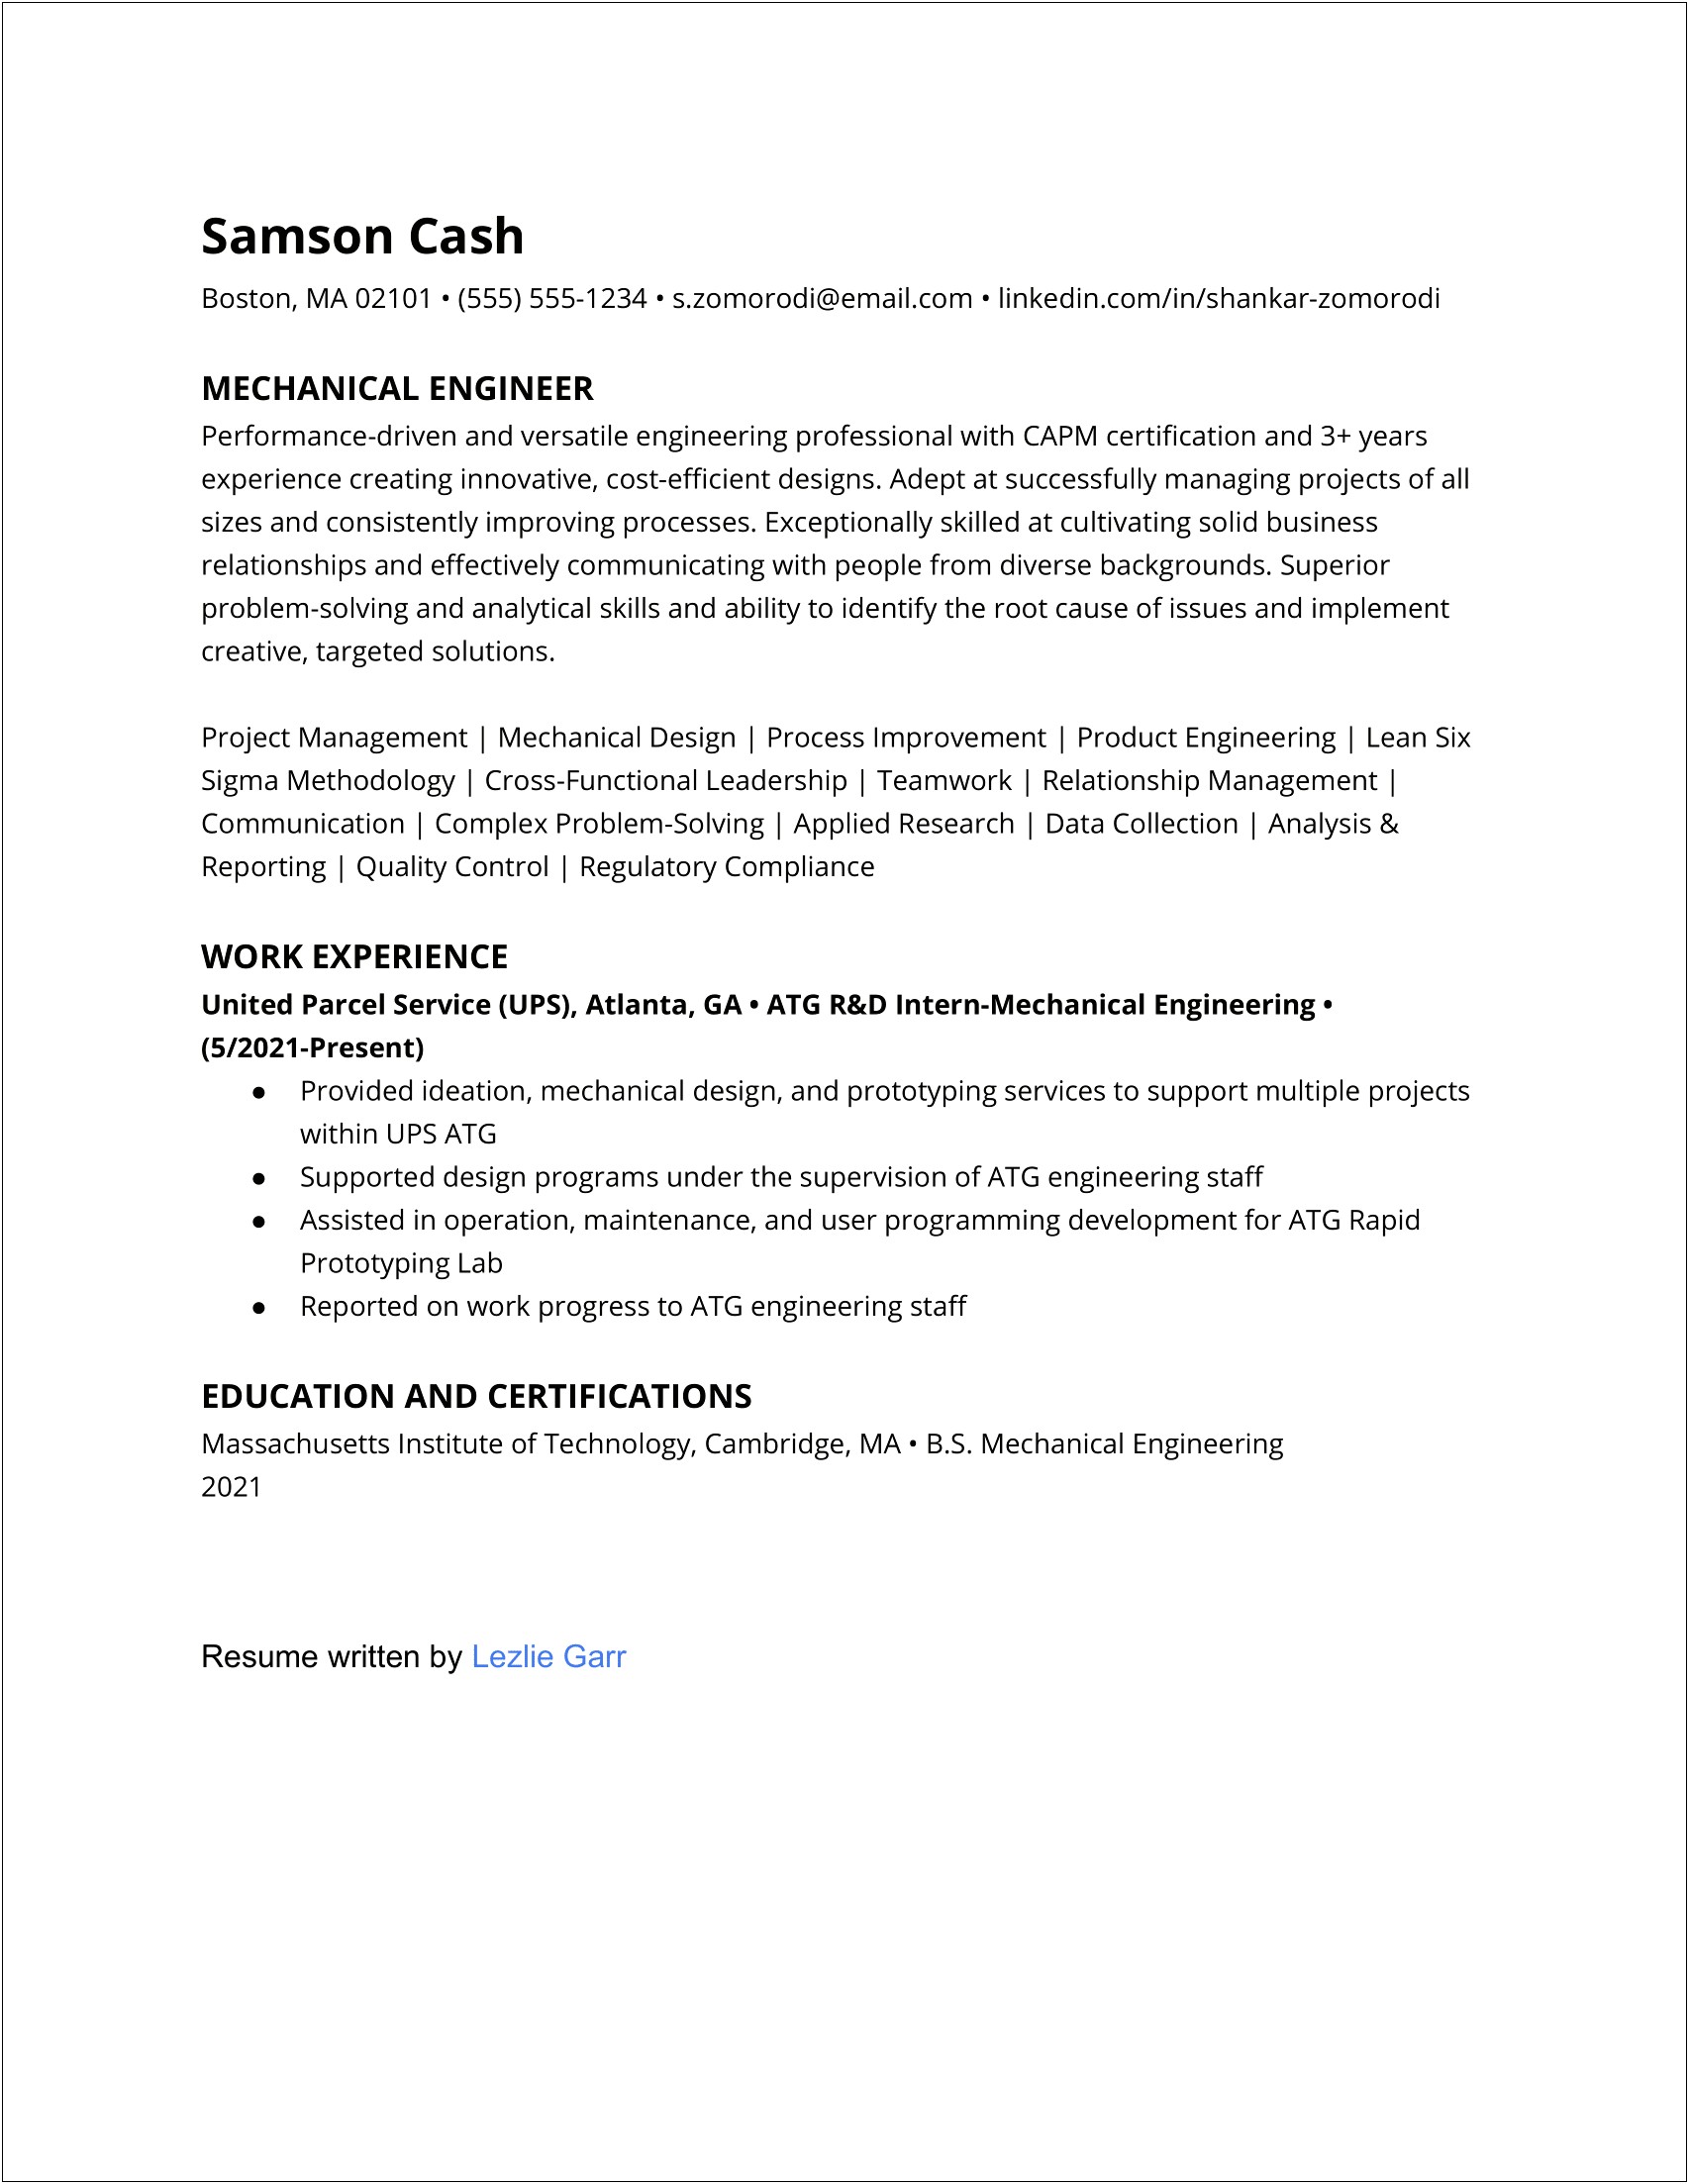 Writing Personal Summary Resume Electrical Engineer